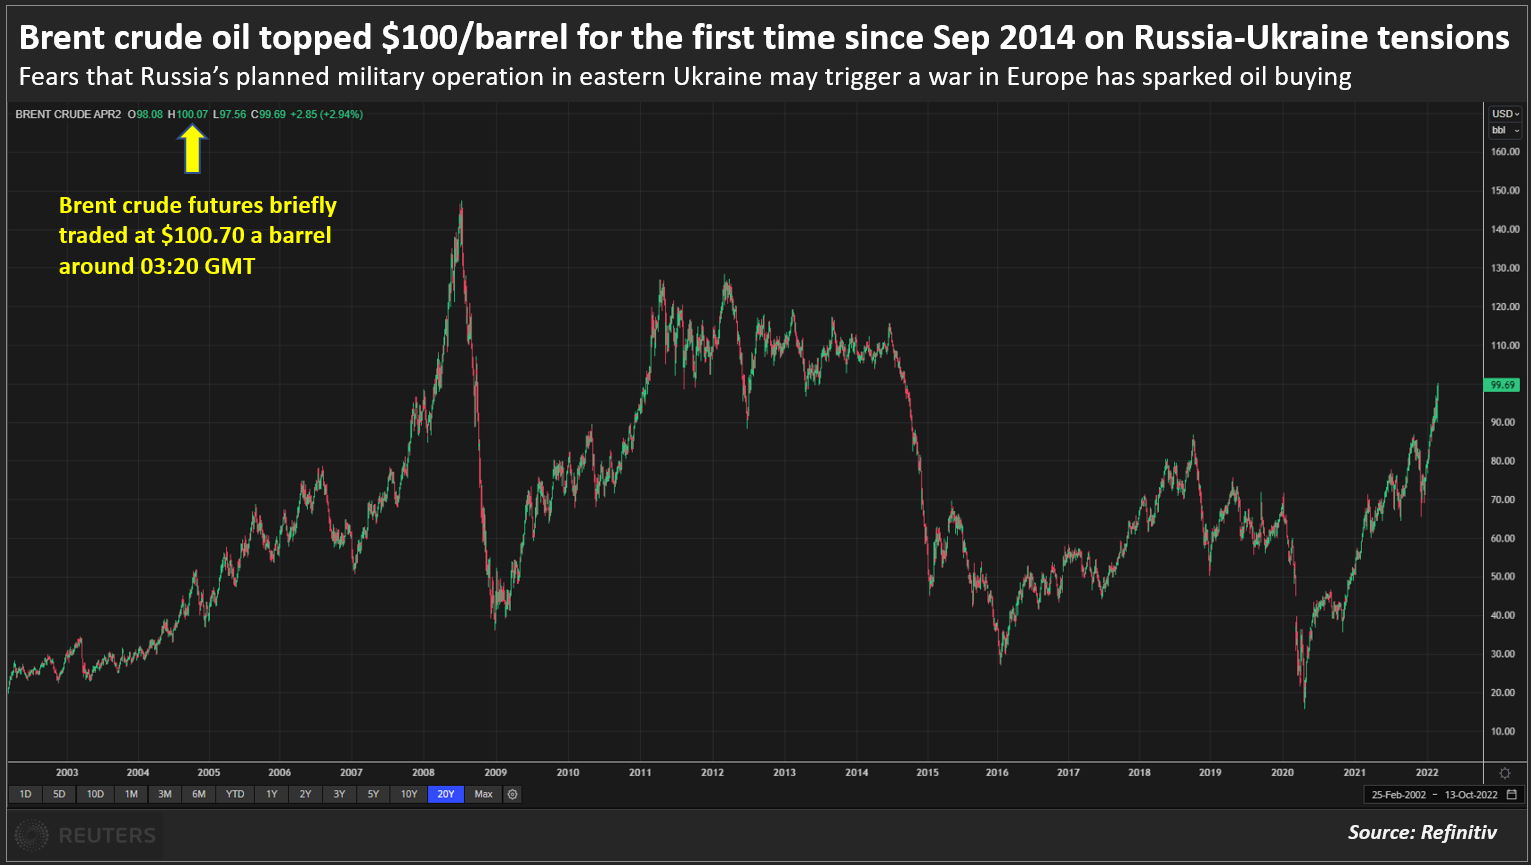 Oil tops $ 100 for first time since 2014 as Russia attacks Ukraine